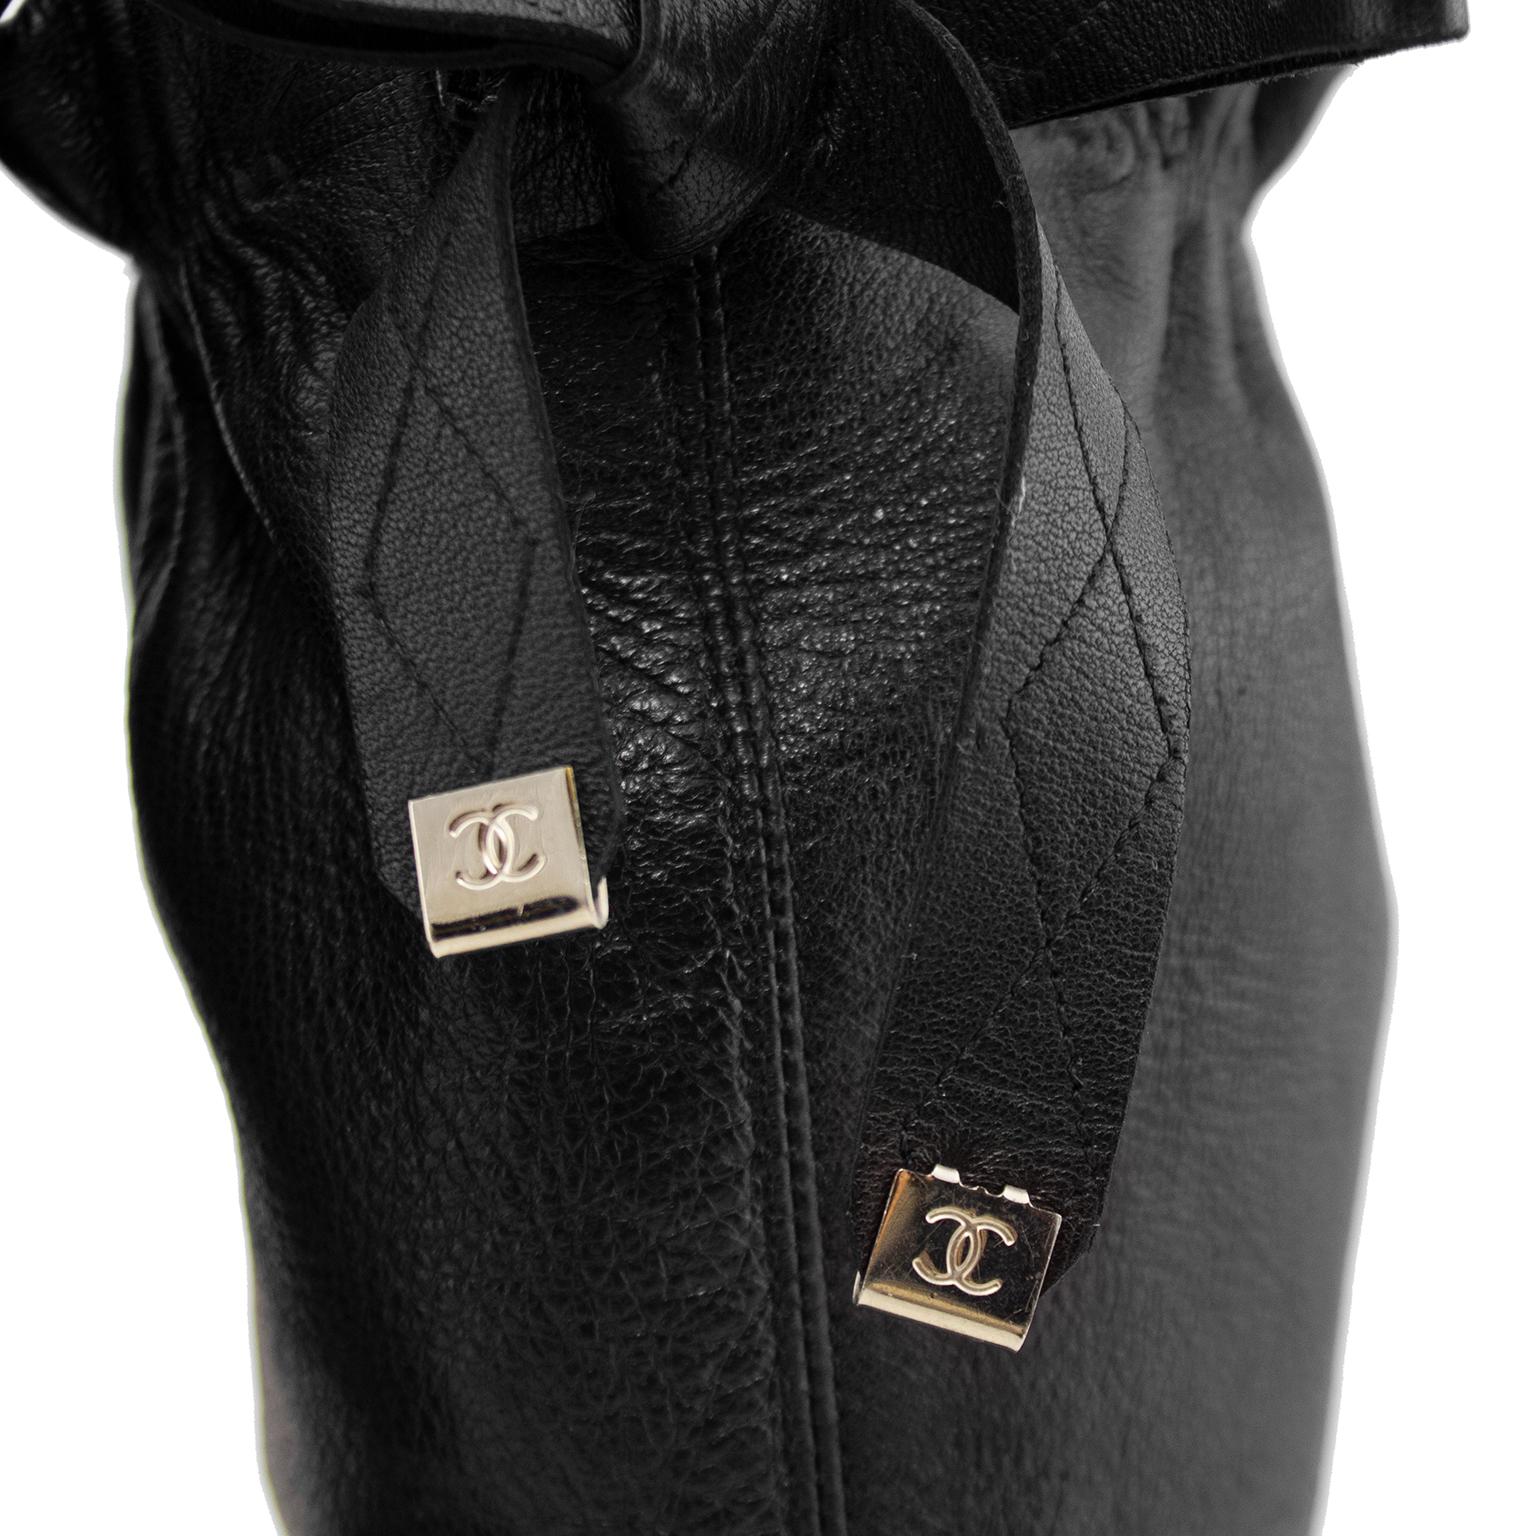 2006 Chanel Spring Collection Leather Boots In Excellent Condition For Sale In Toronto, Ontario